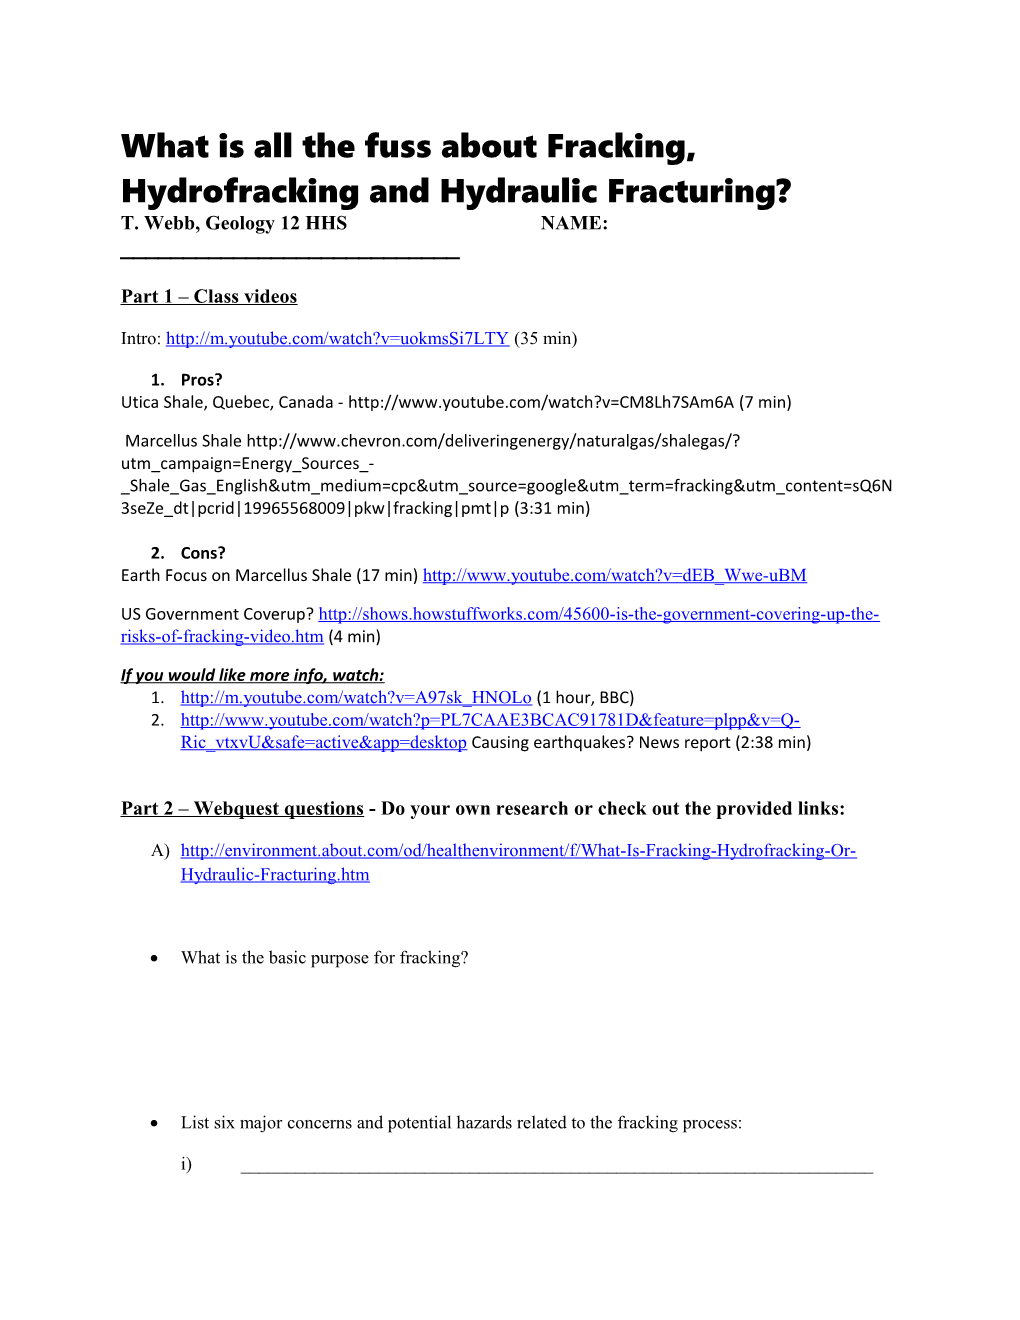 What Is All the Fuss About Fracking, Hydrofracking and Hydraulic Fracturing?